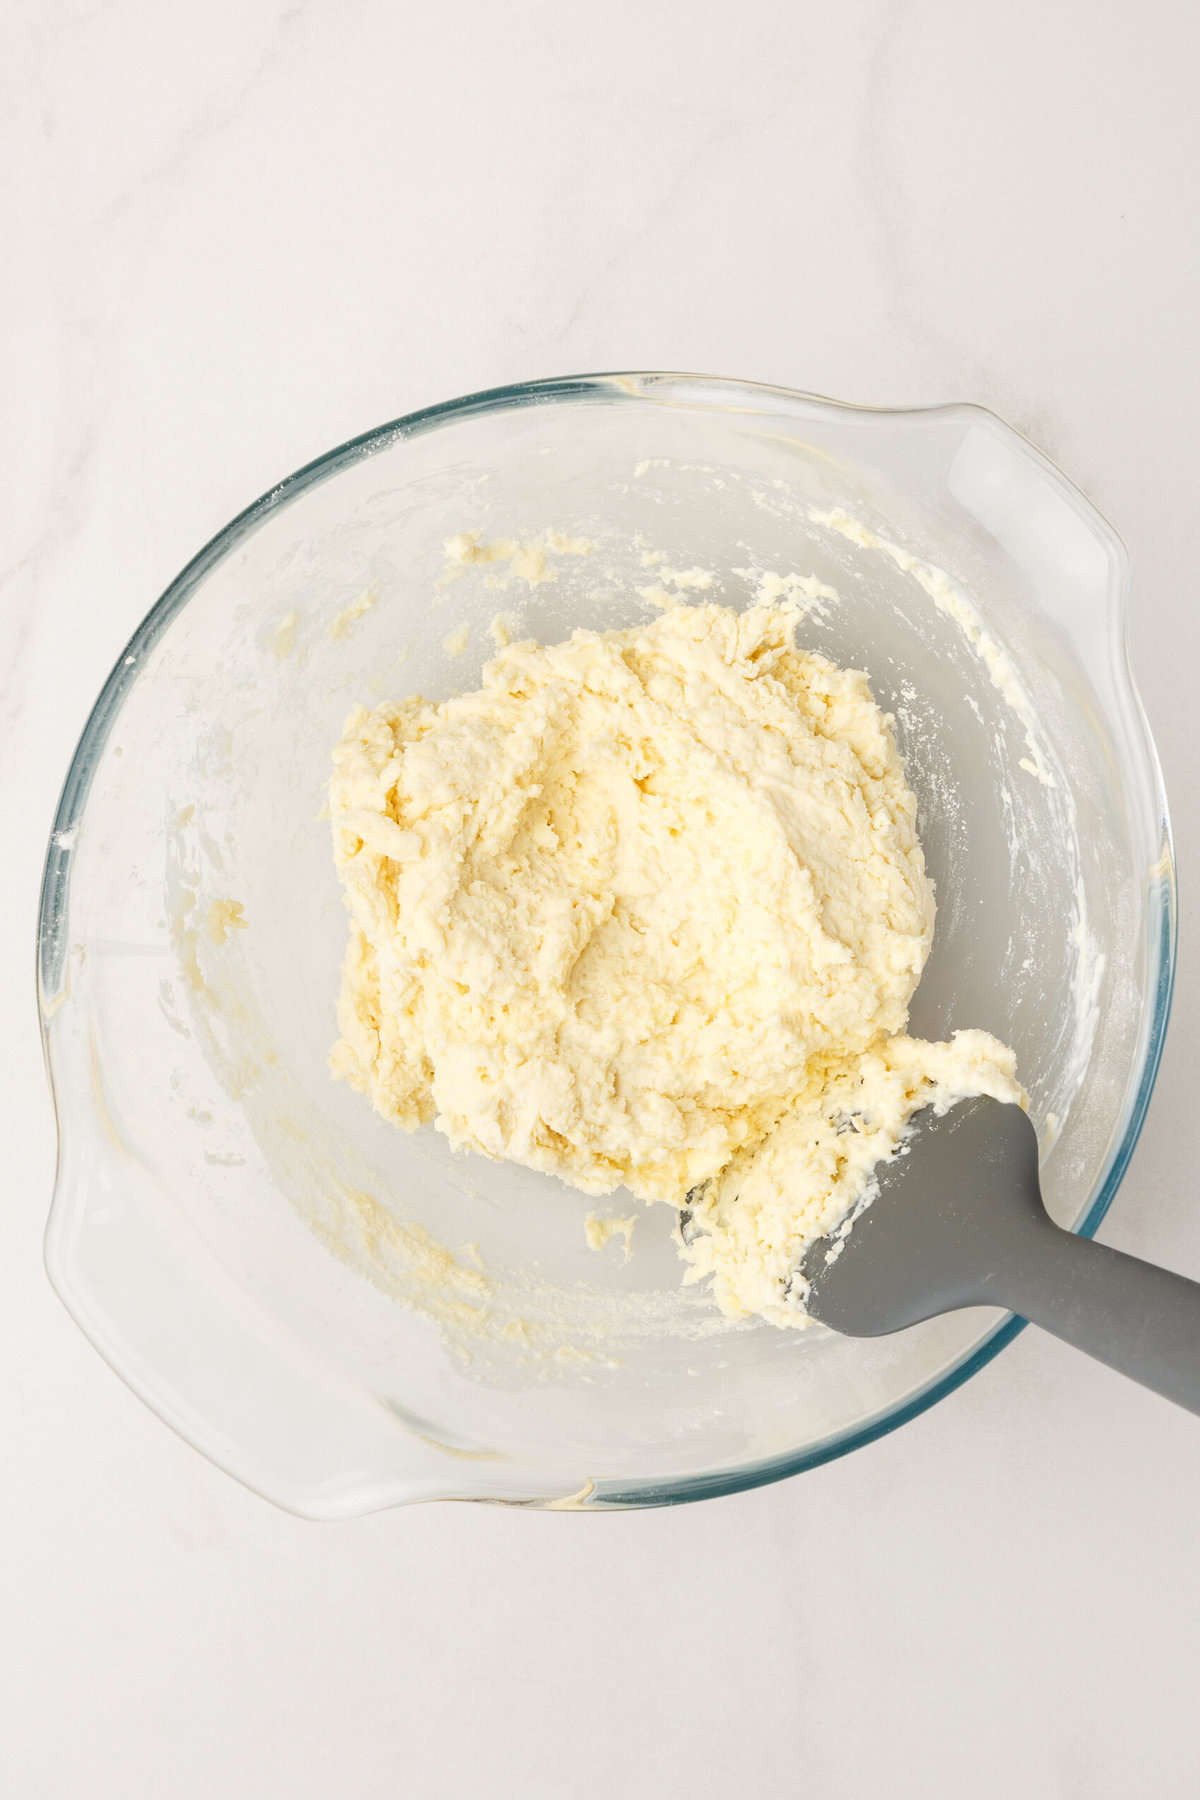 Top down image of homemade Popeyes biscuit dough, sitting in a large glass mixing bowl.